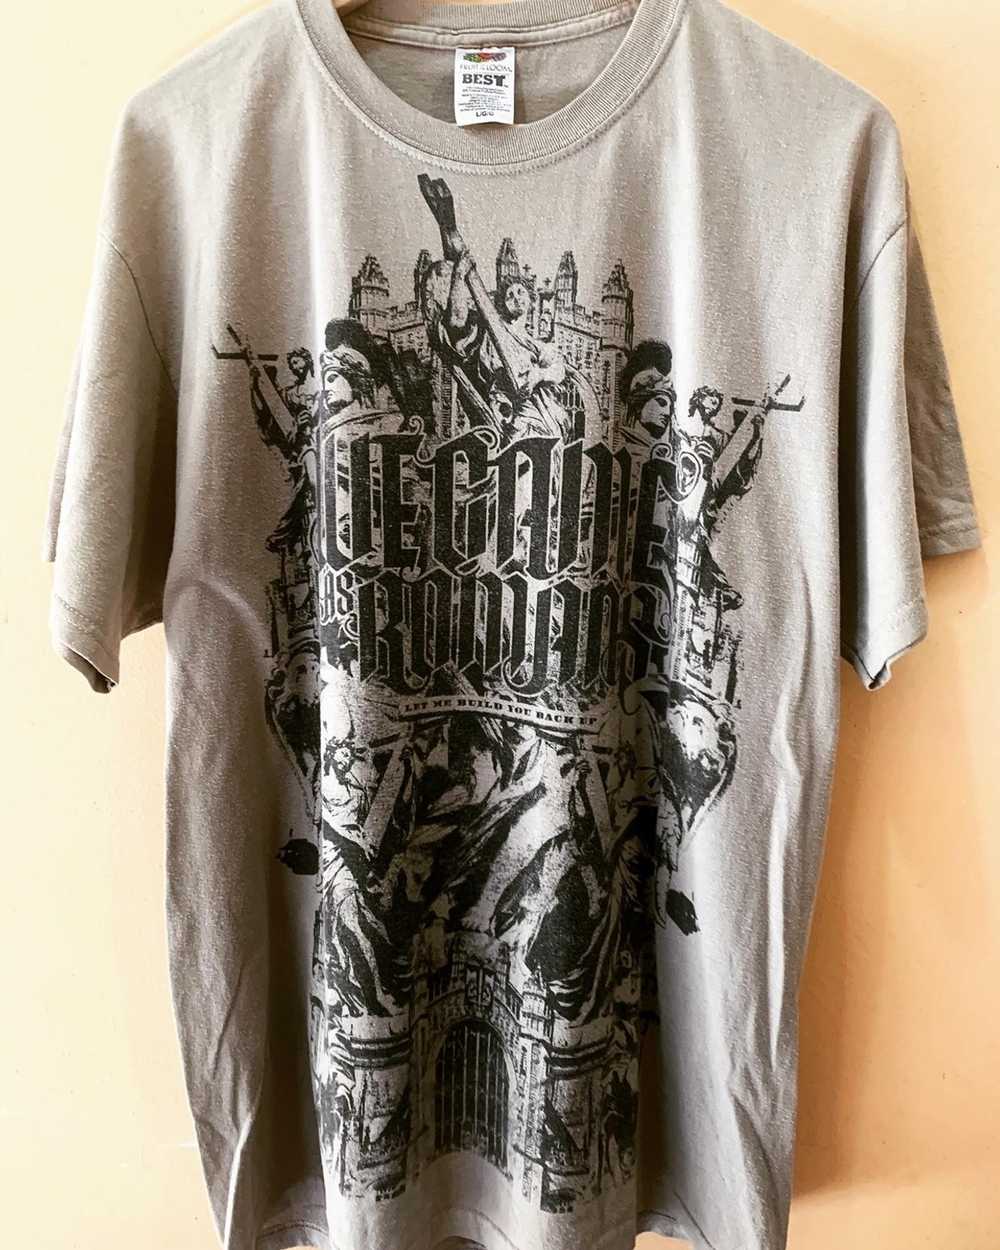 Band Tees × Vintage We Came As Romans - image 1